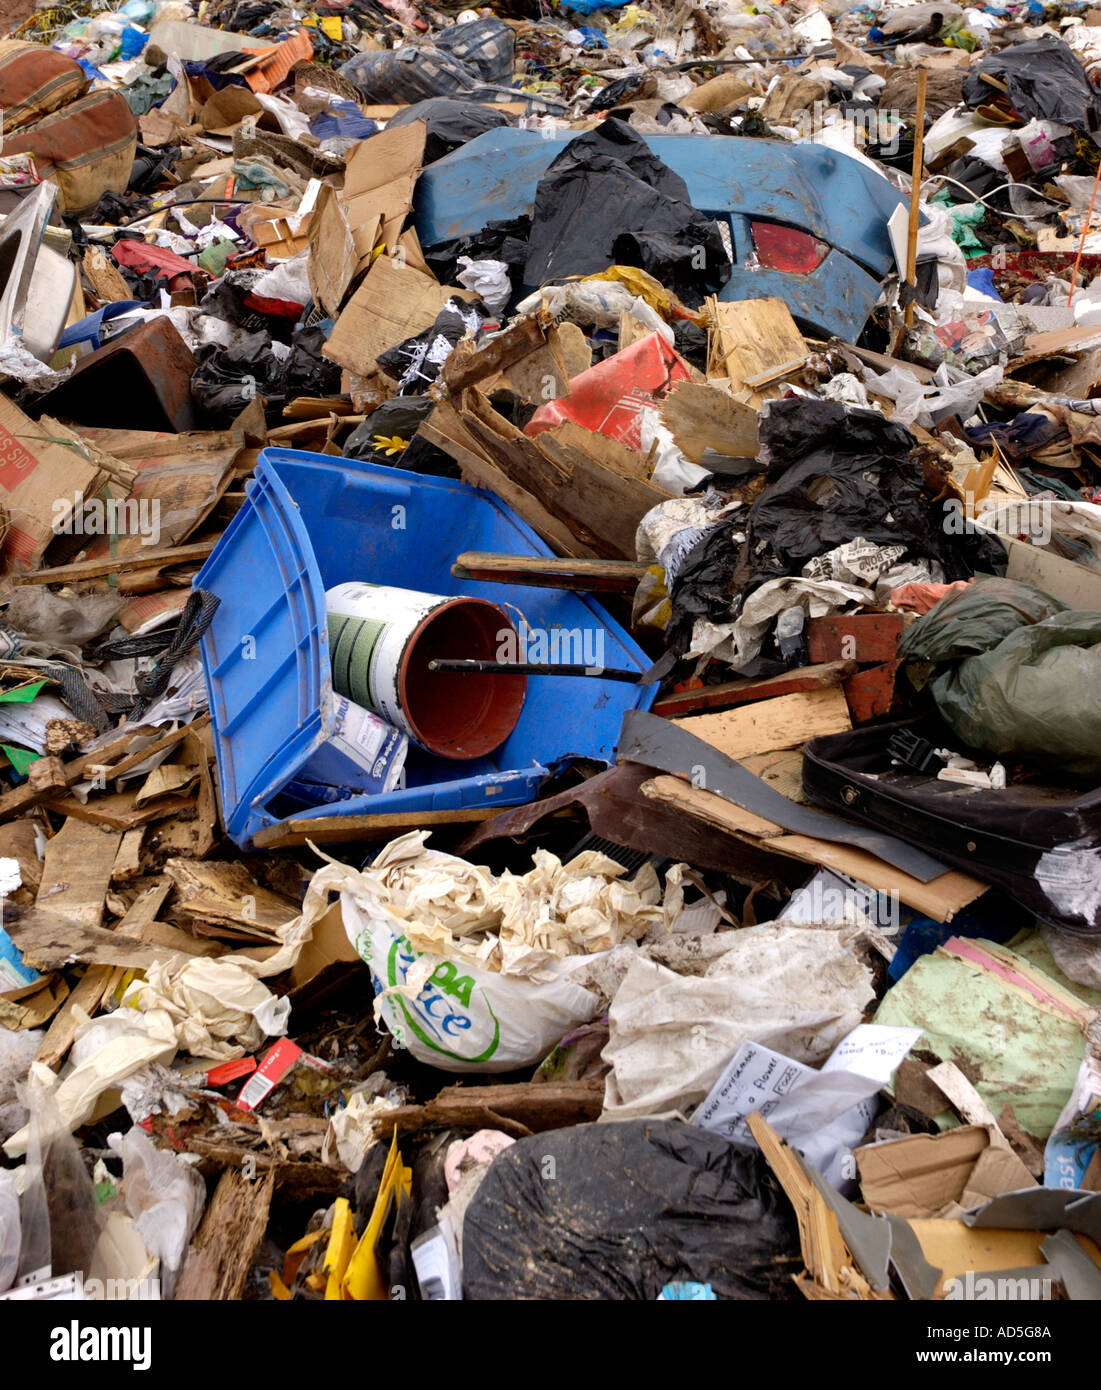 waste and rubbish products in landfill climate change fly tipping pollution Stock Photo